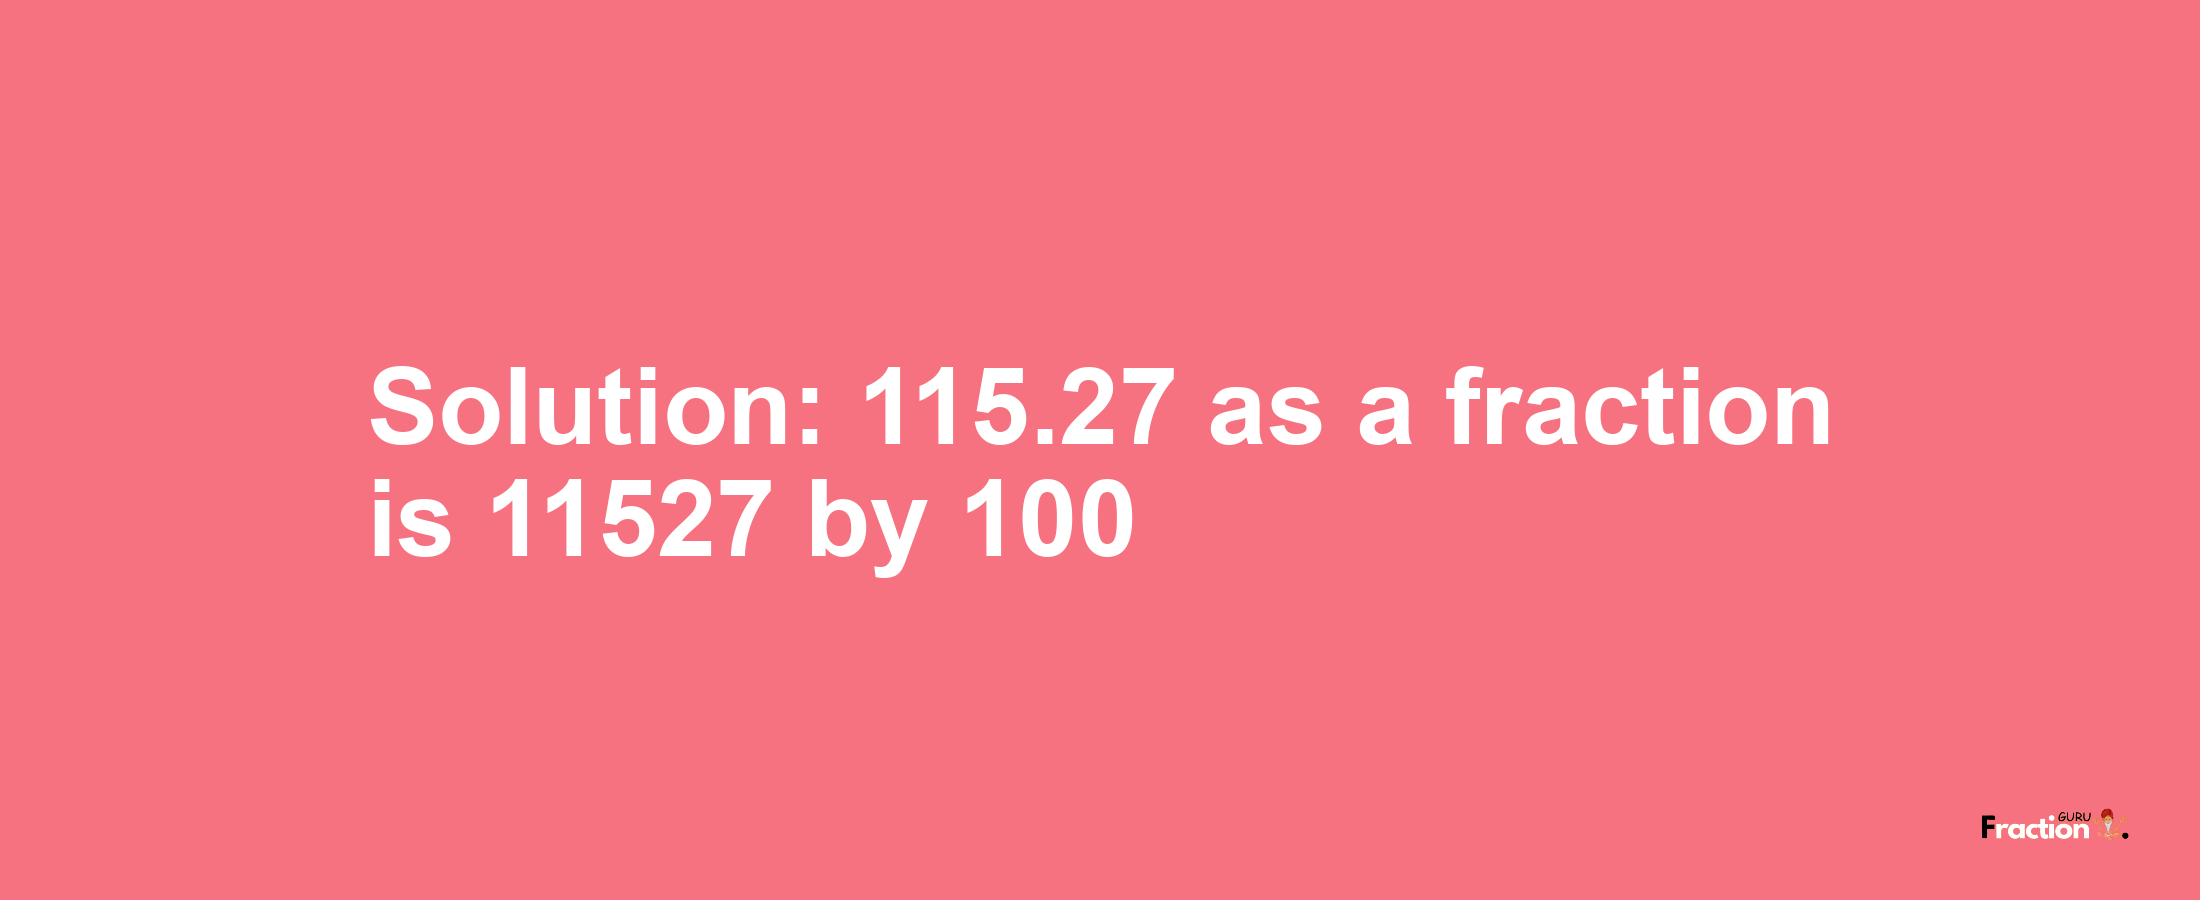 Solution:115.27 as a fraction is 11527/100